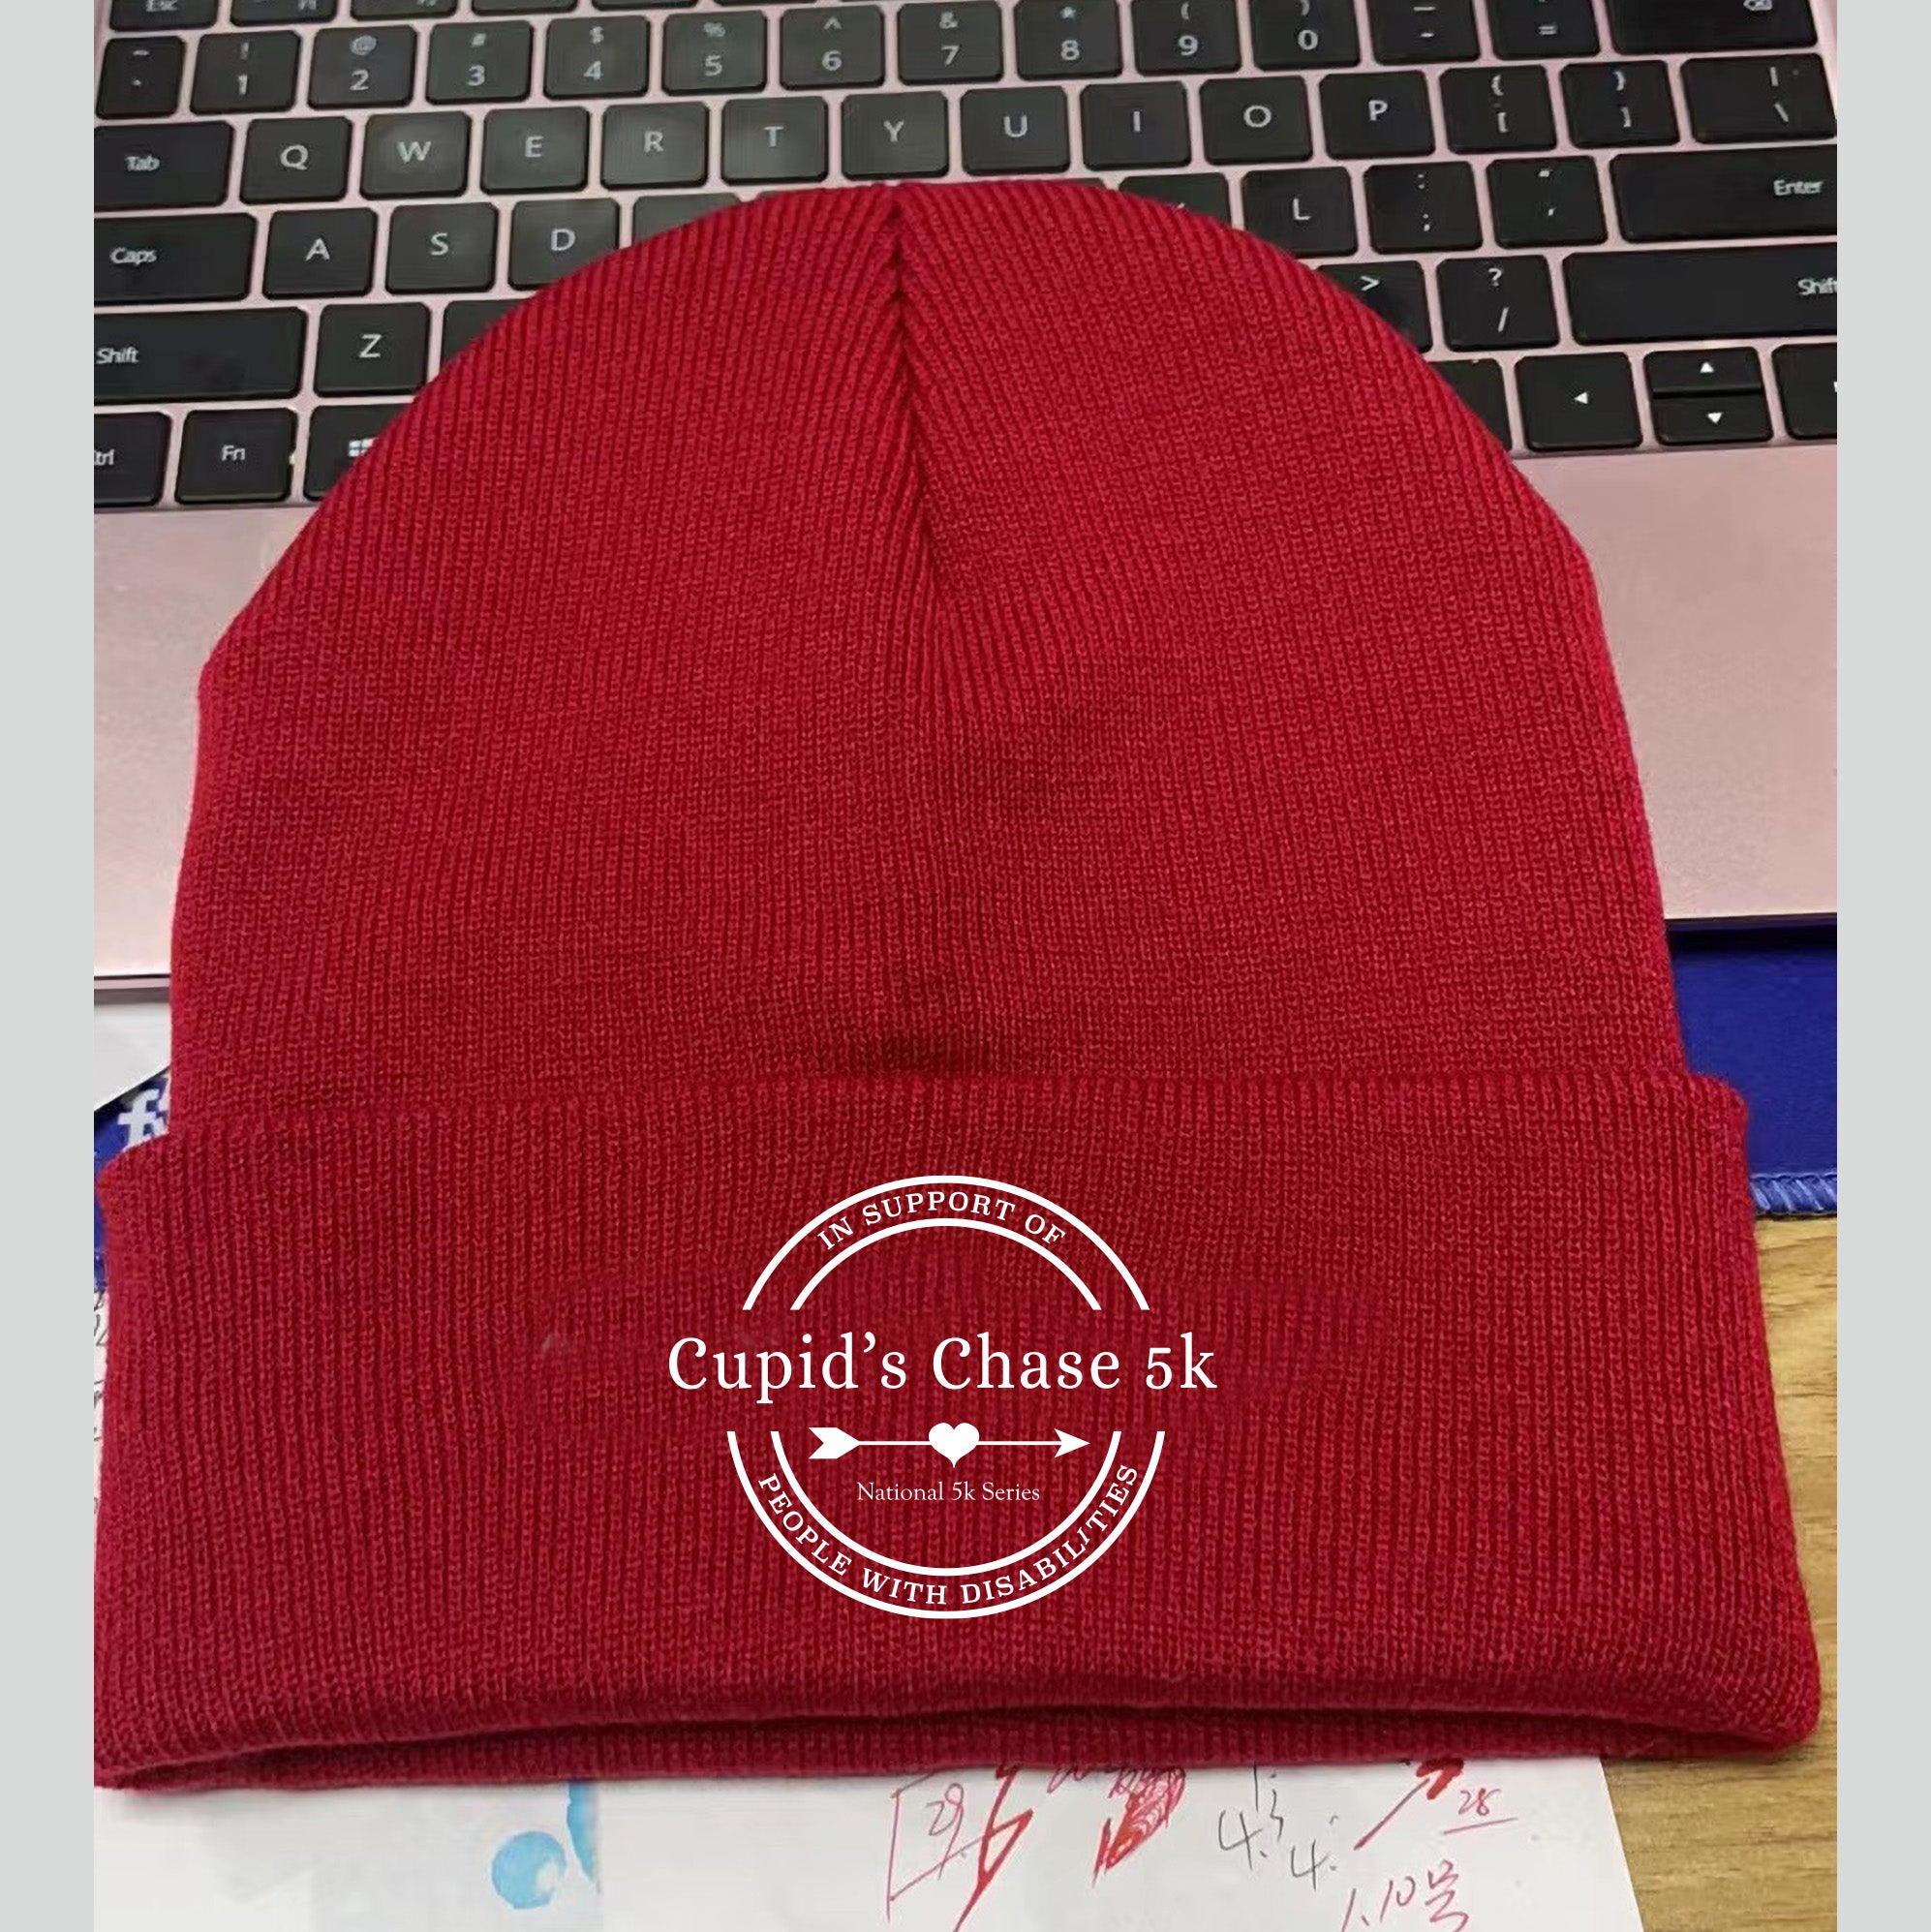 Cupid's Chase Red Knit hat